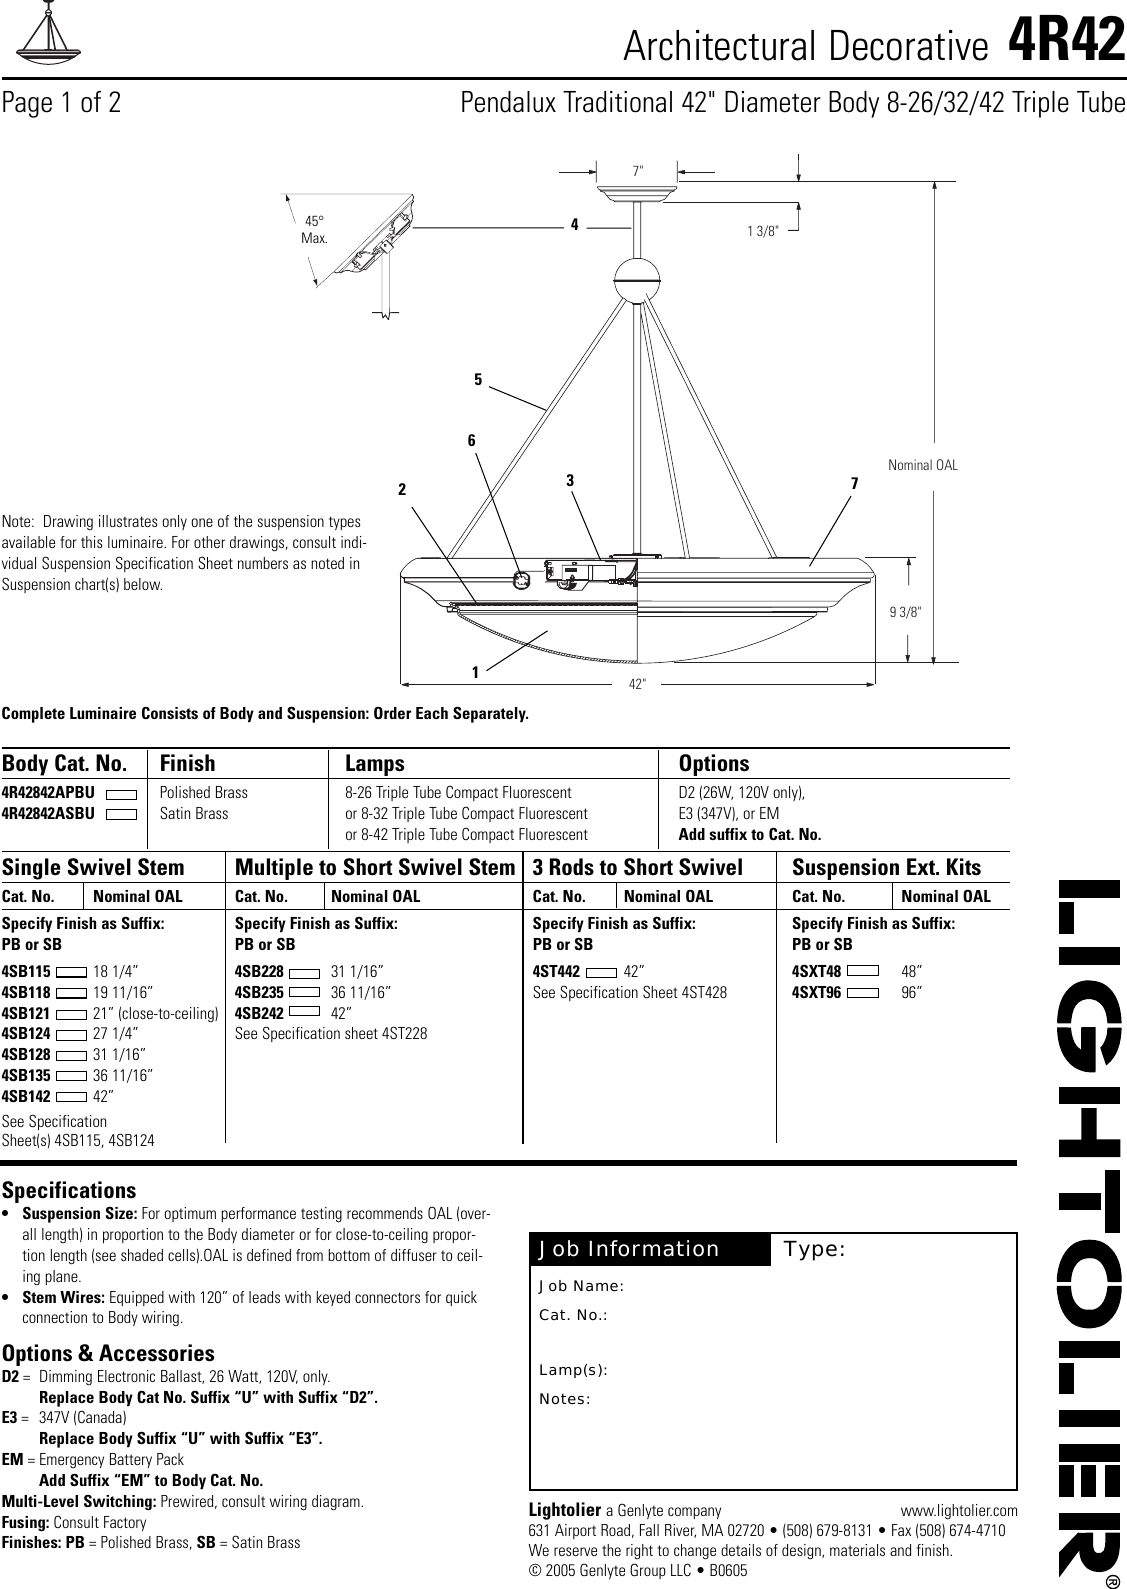 Page 1 of 2 - Lightolier Lightolier-Architectural-Decorative-4R42-Users-Manual- 4R42  Lightolier-architectural-decorative-4r42-users-manual